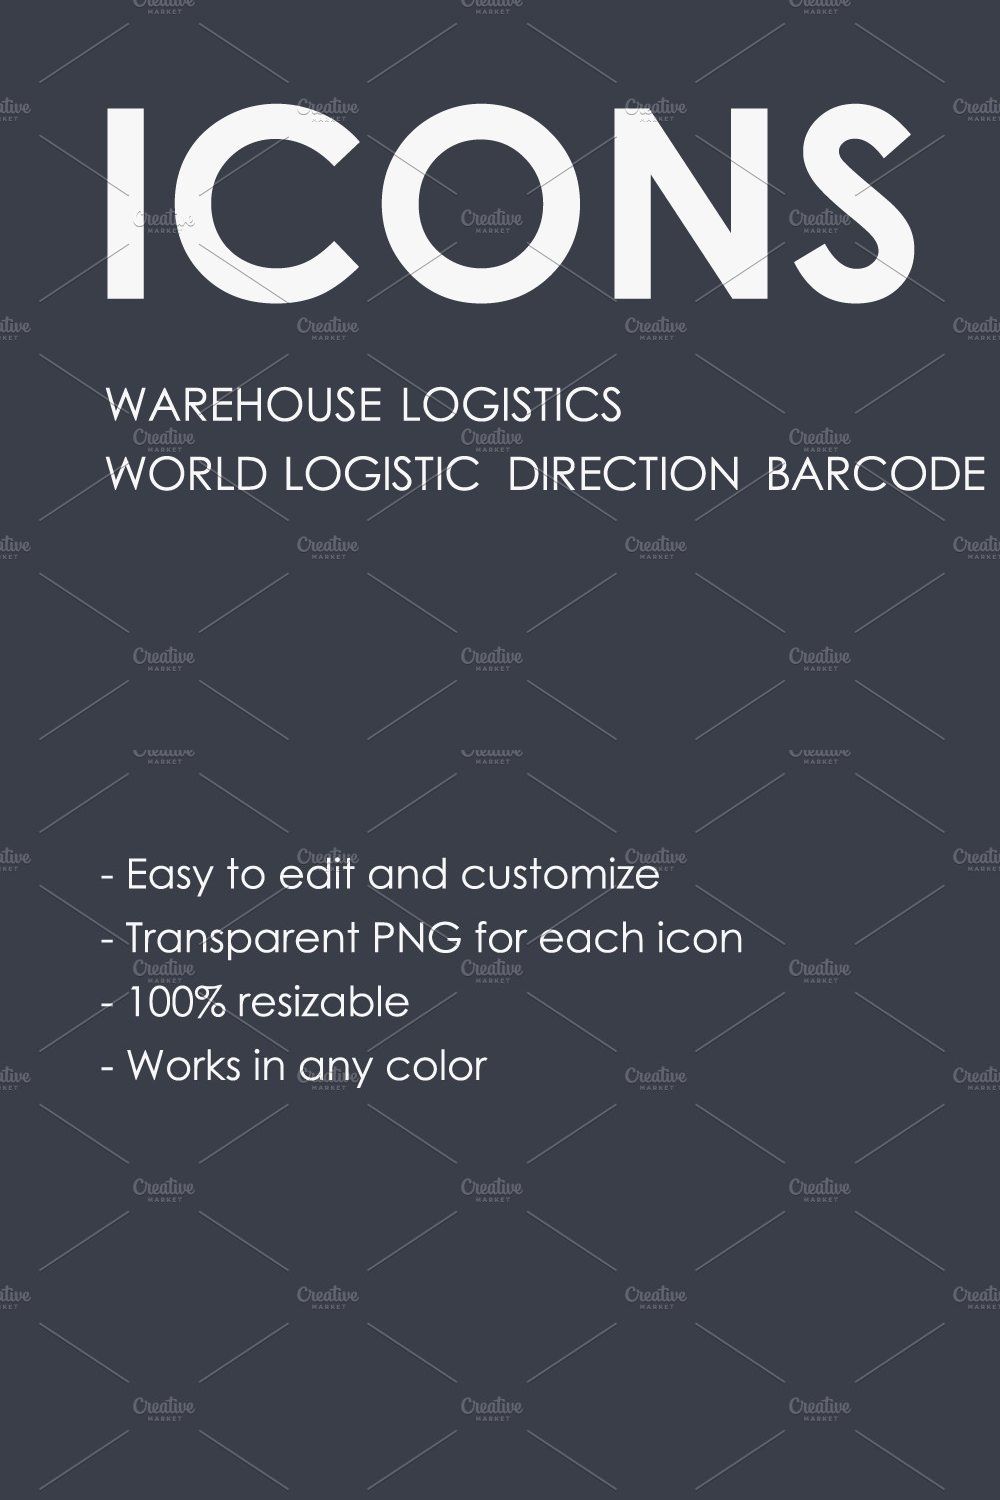 Warehouse logistics thinline icons pinterest preview image.